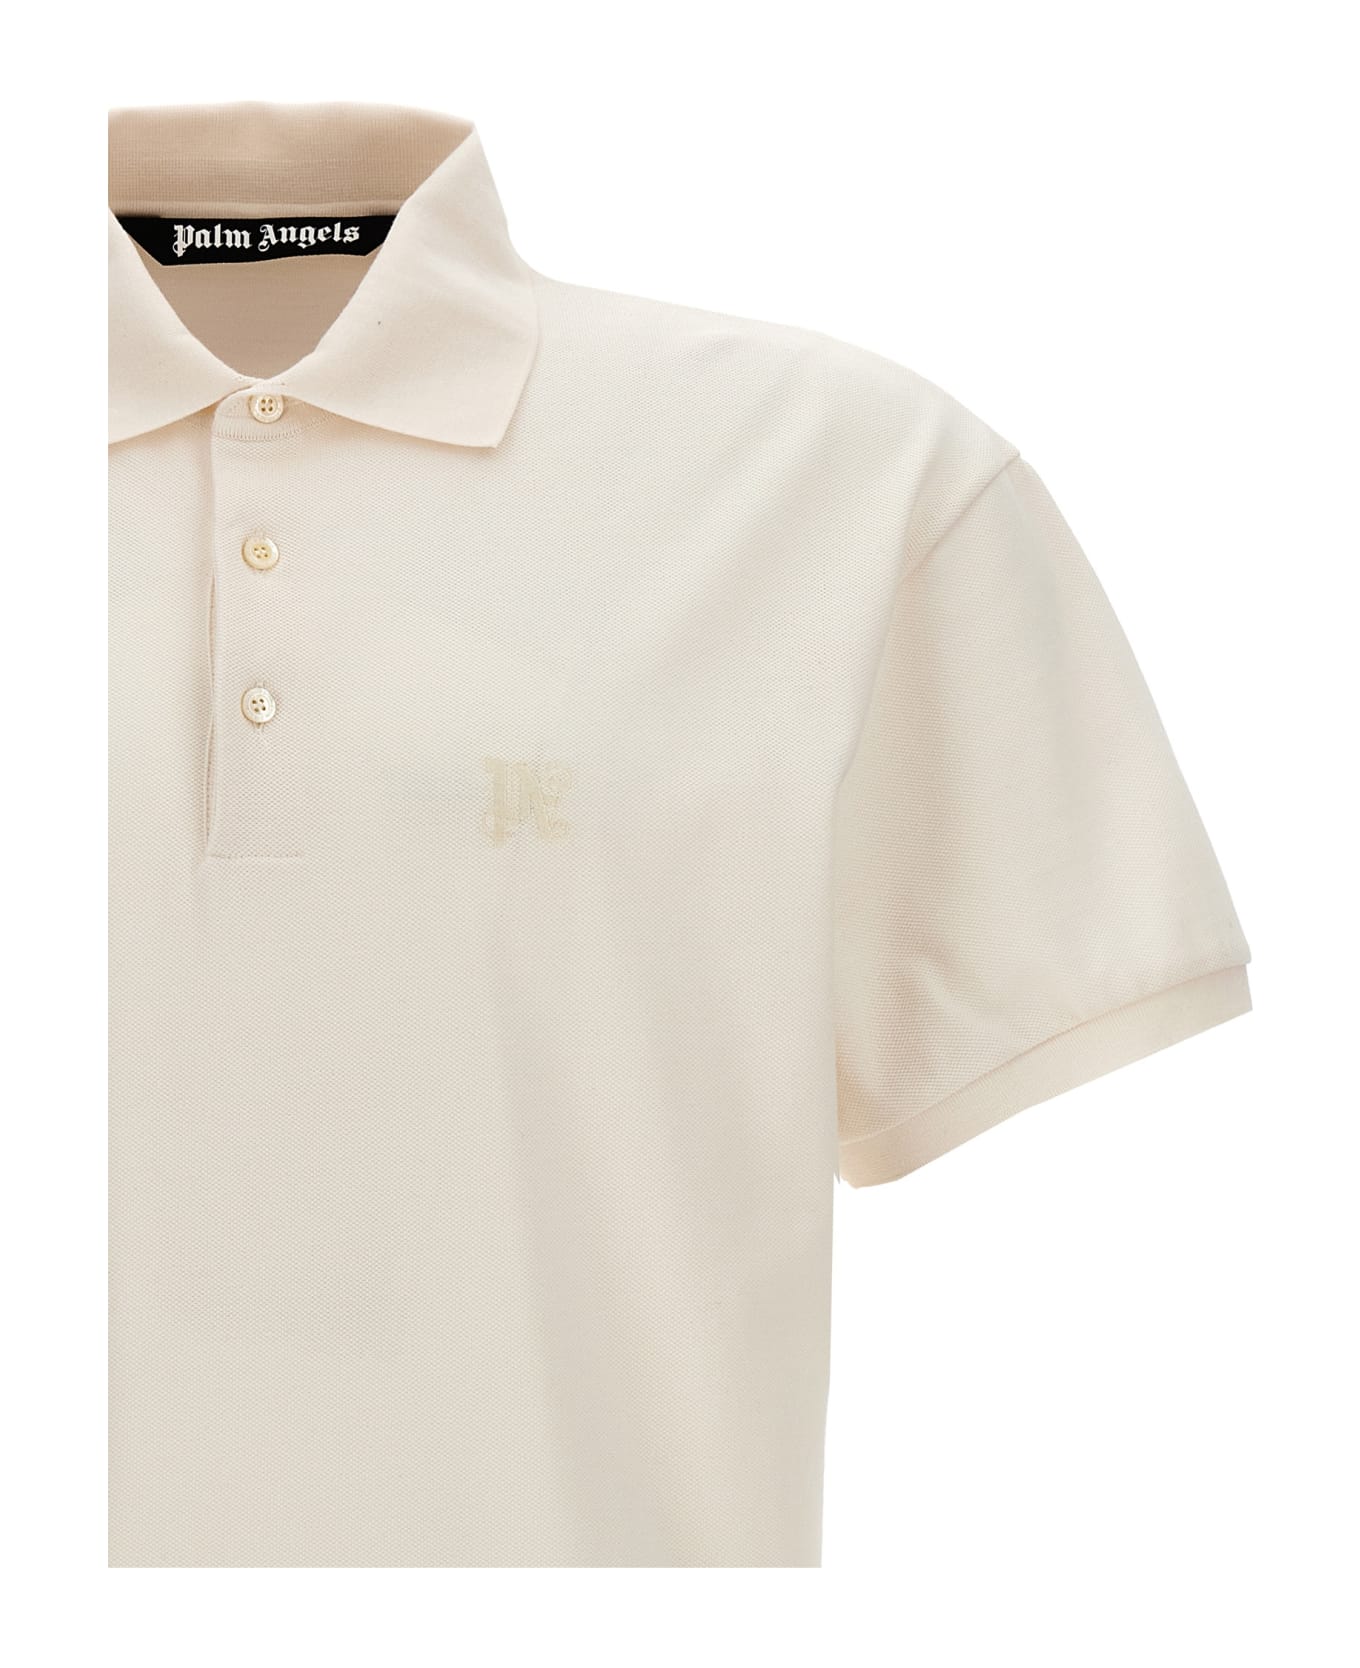 Palm Angels Polo Shirt - White ポロシャツ